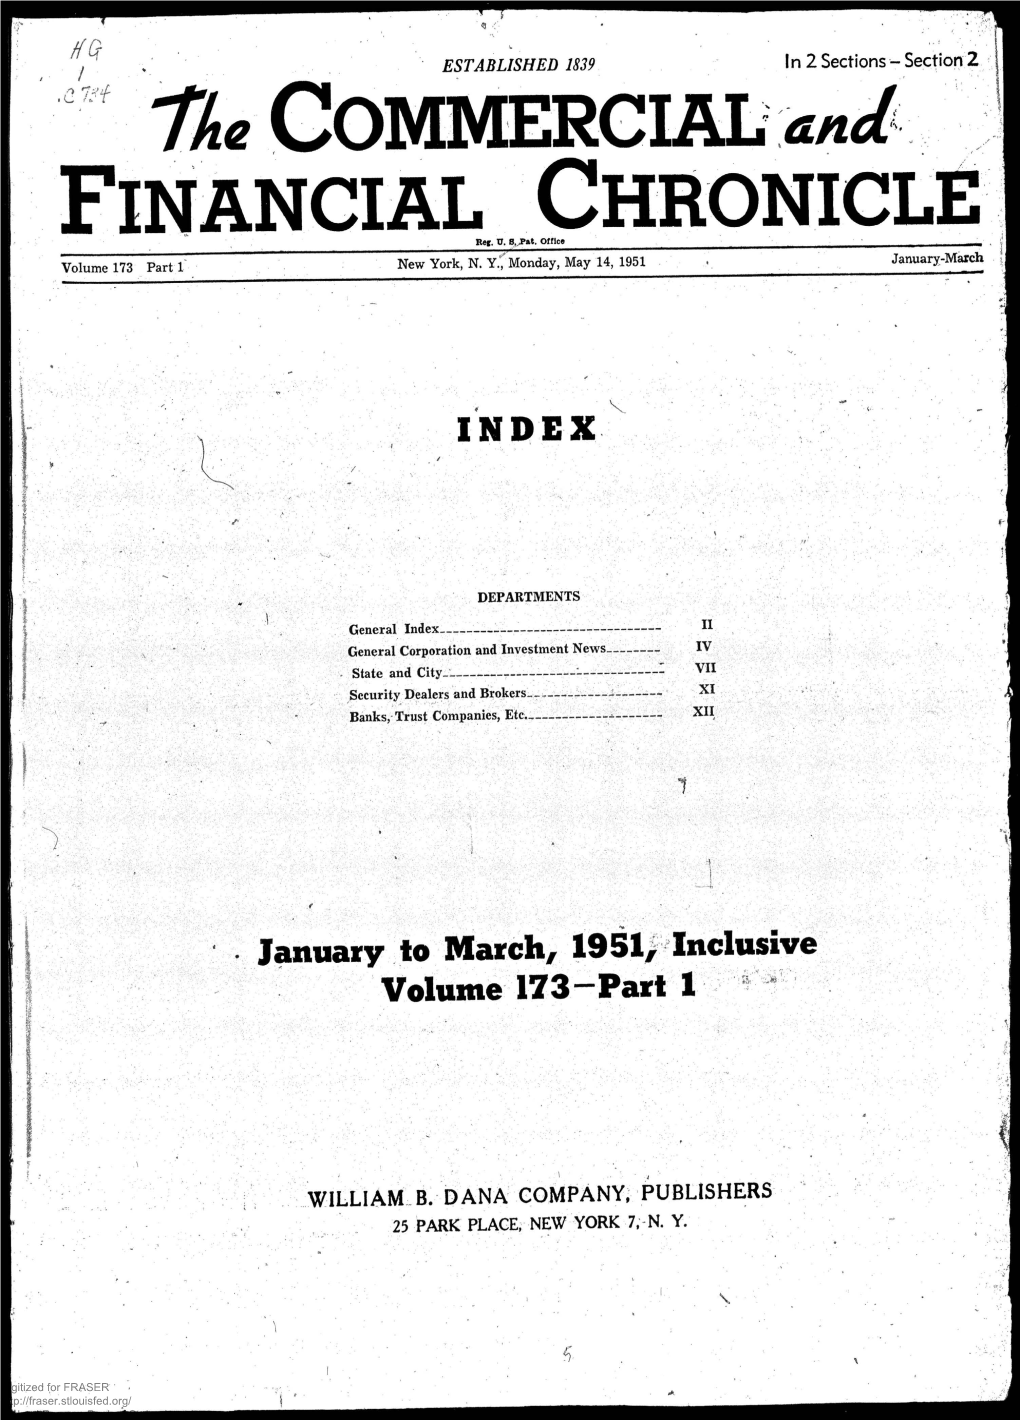 January to March 1951, Inclusive: Index to Volume